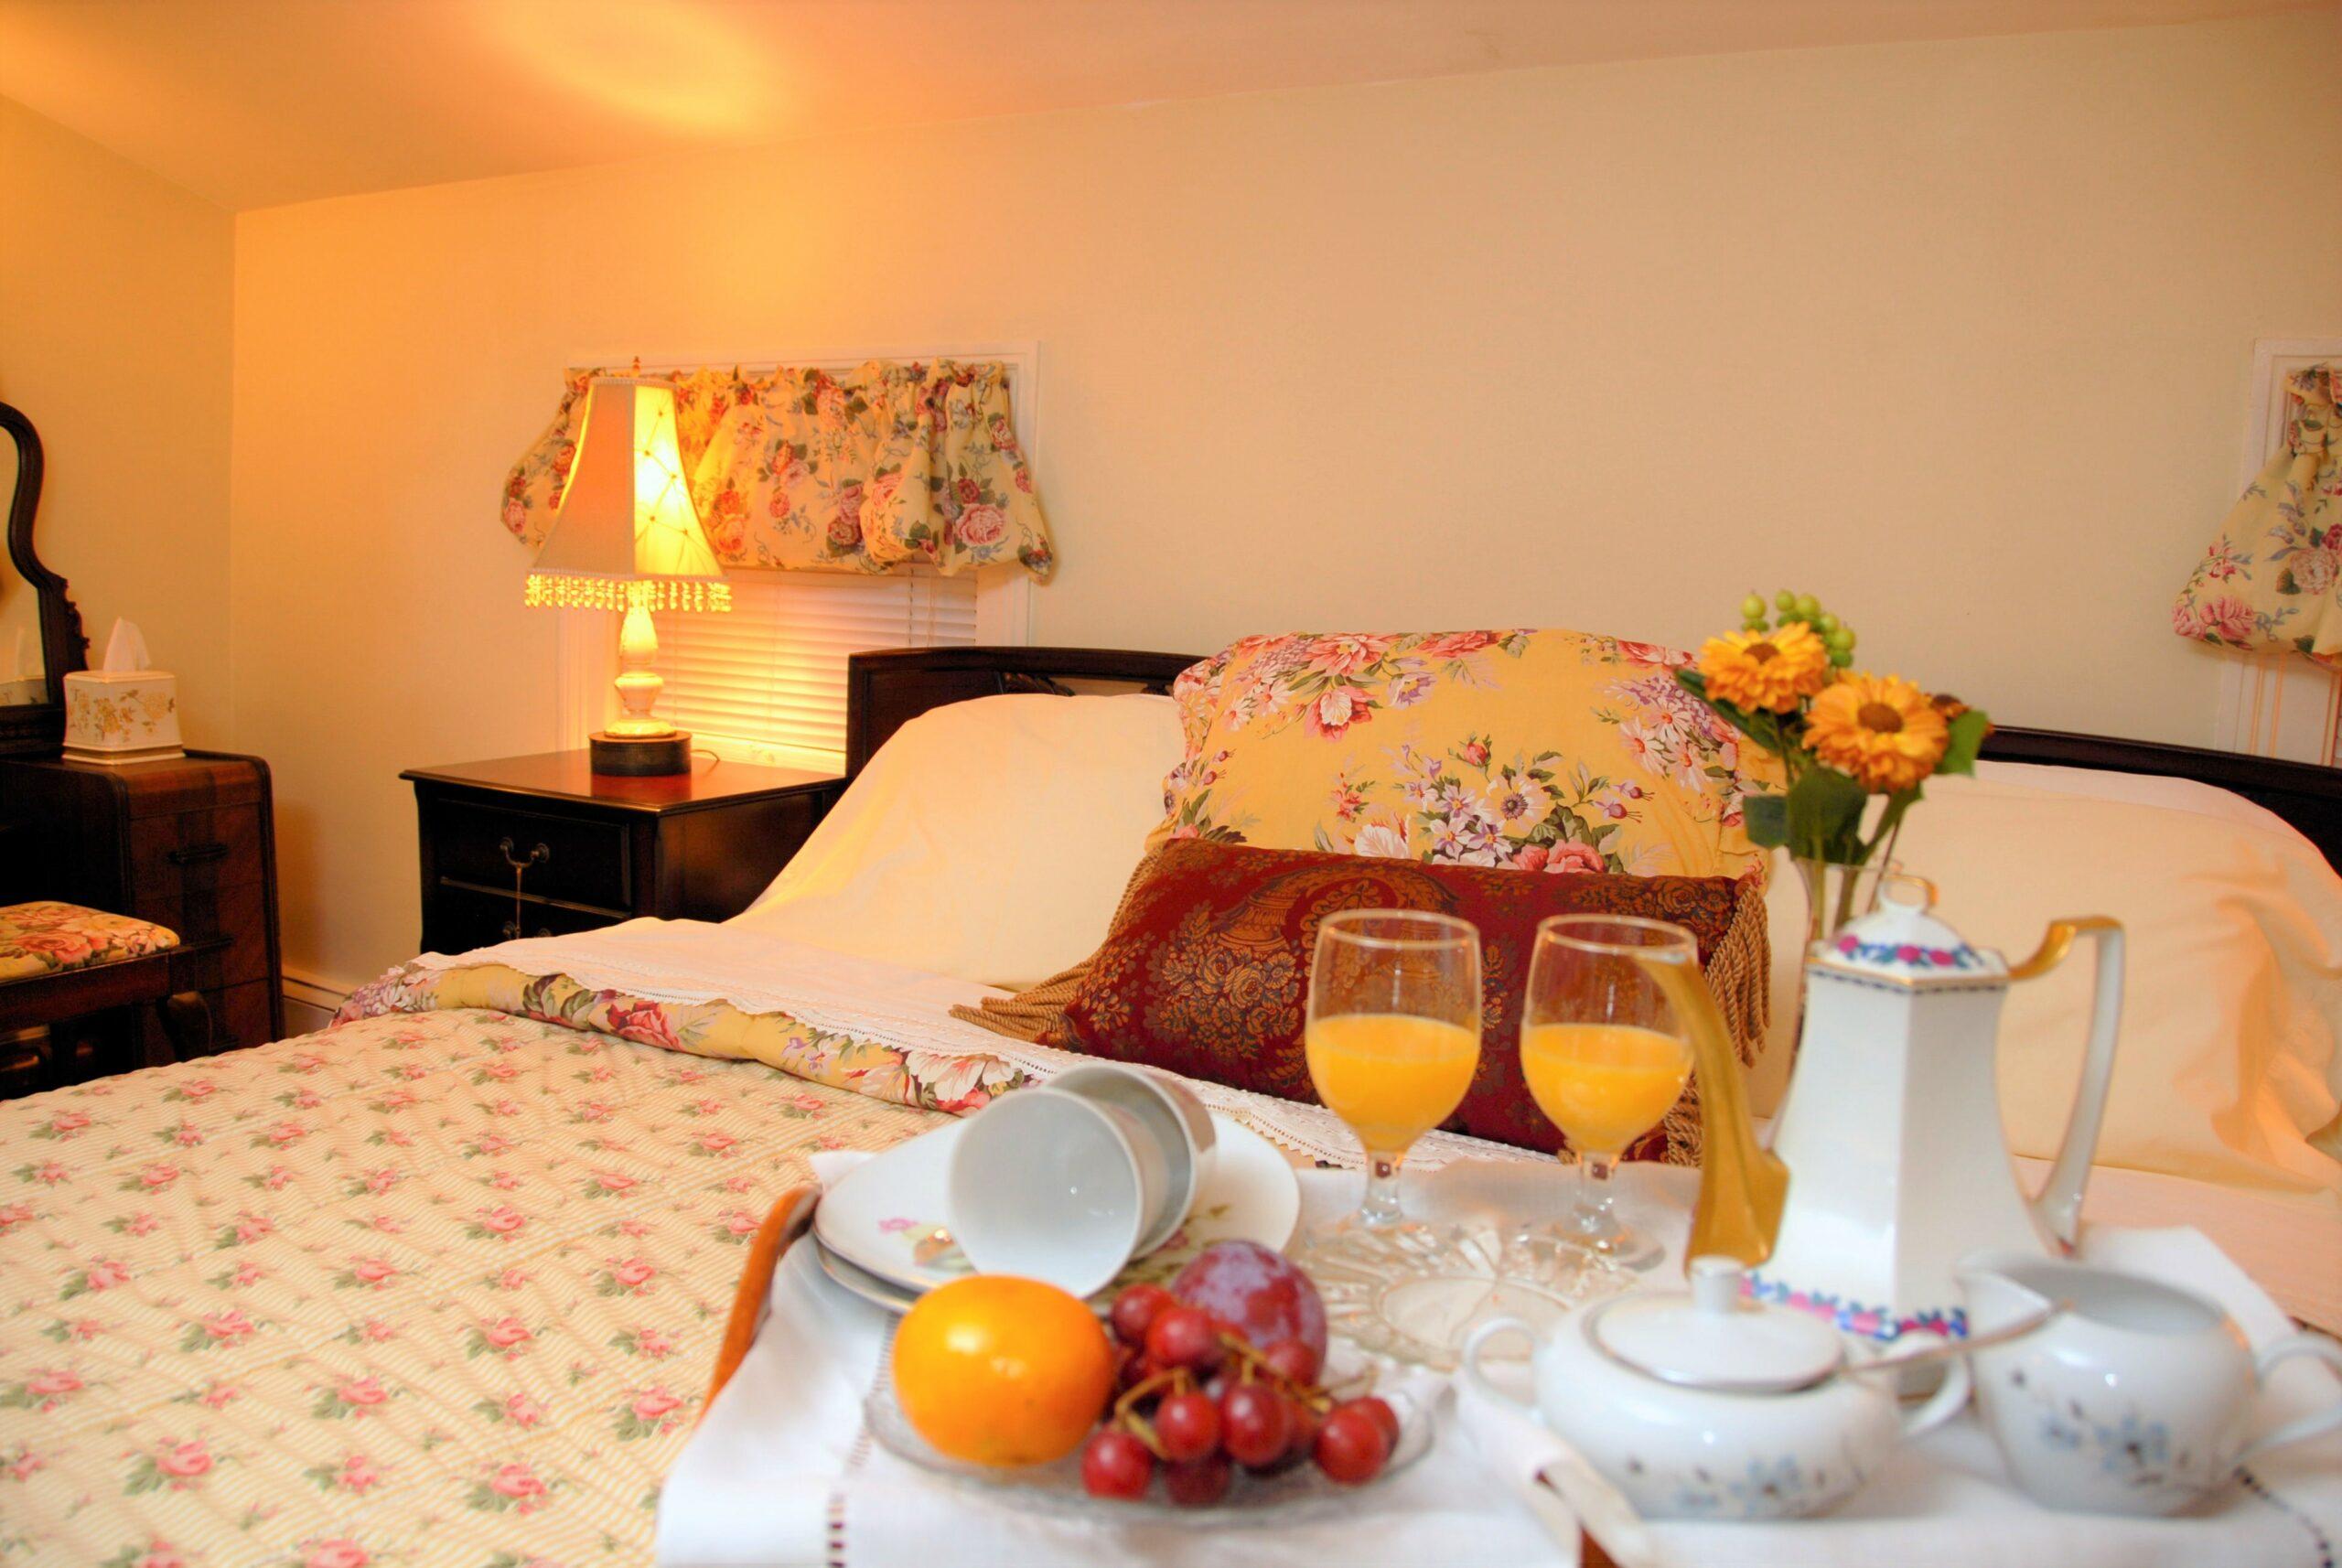 The Champagne Suite with Sleigh king size bed with a tray of orange Juice and fruit